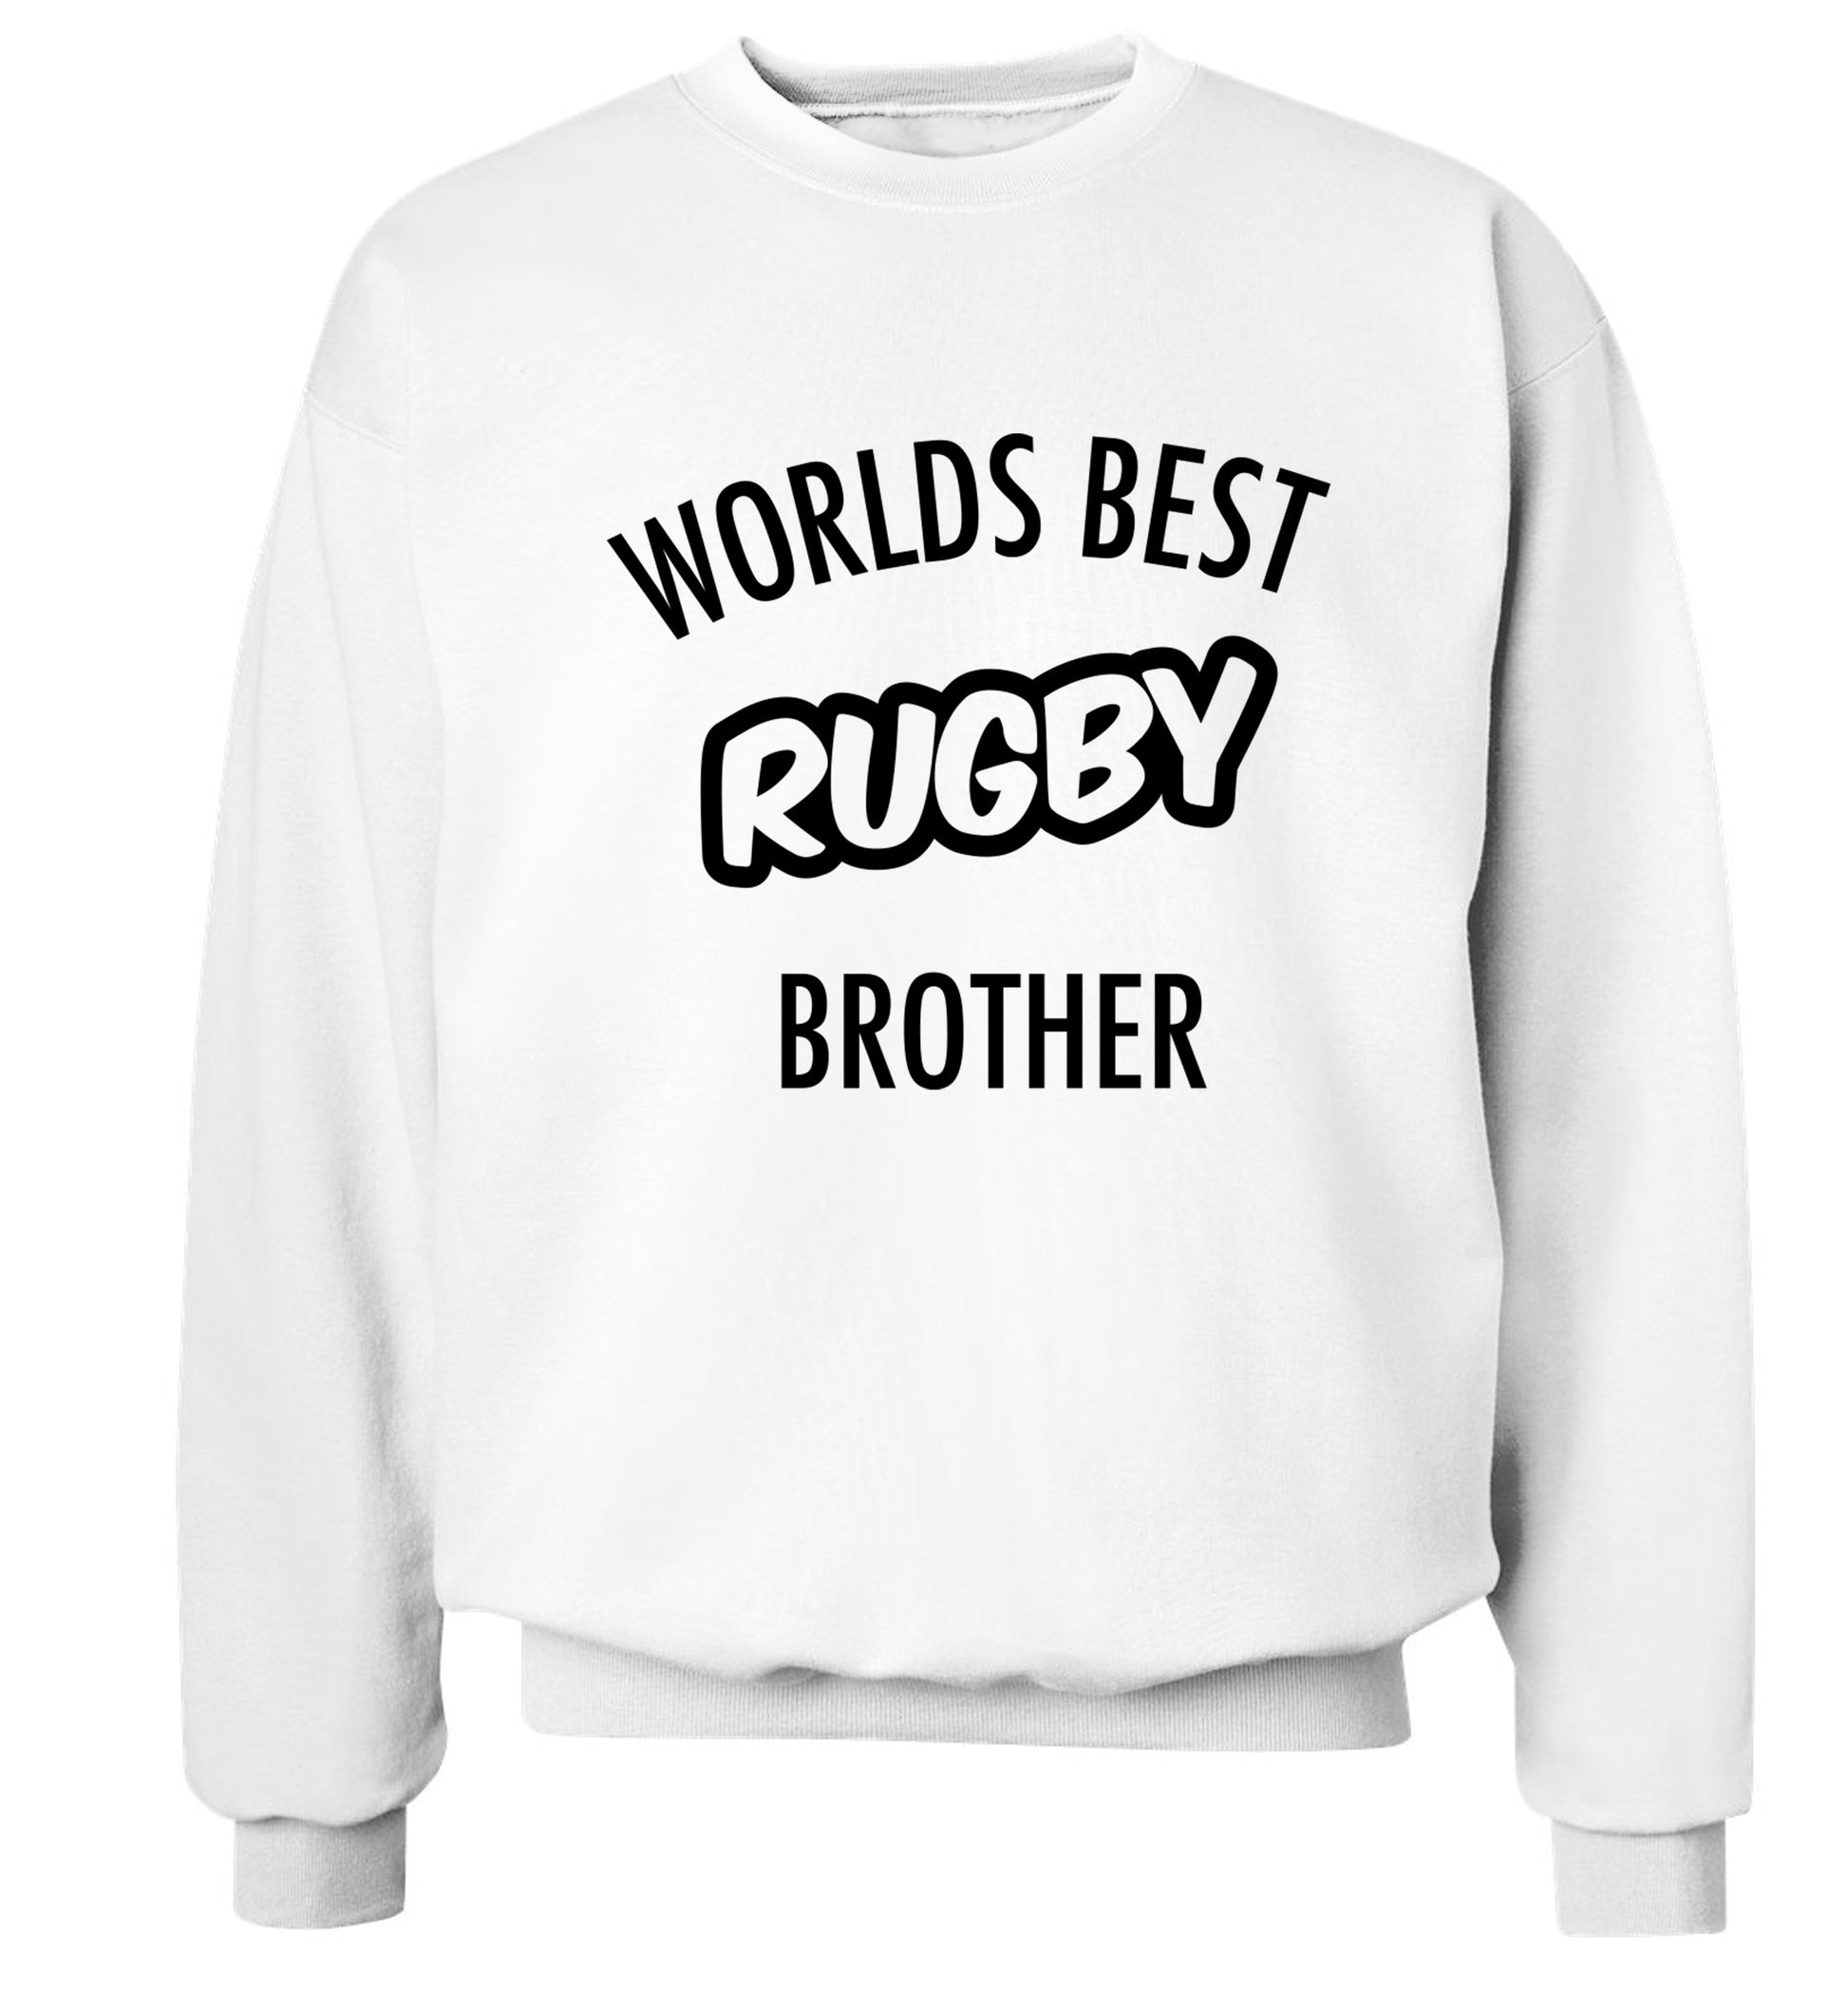 Worlds best rugby brother Adult's unisex white Sweater 2XL